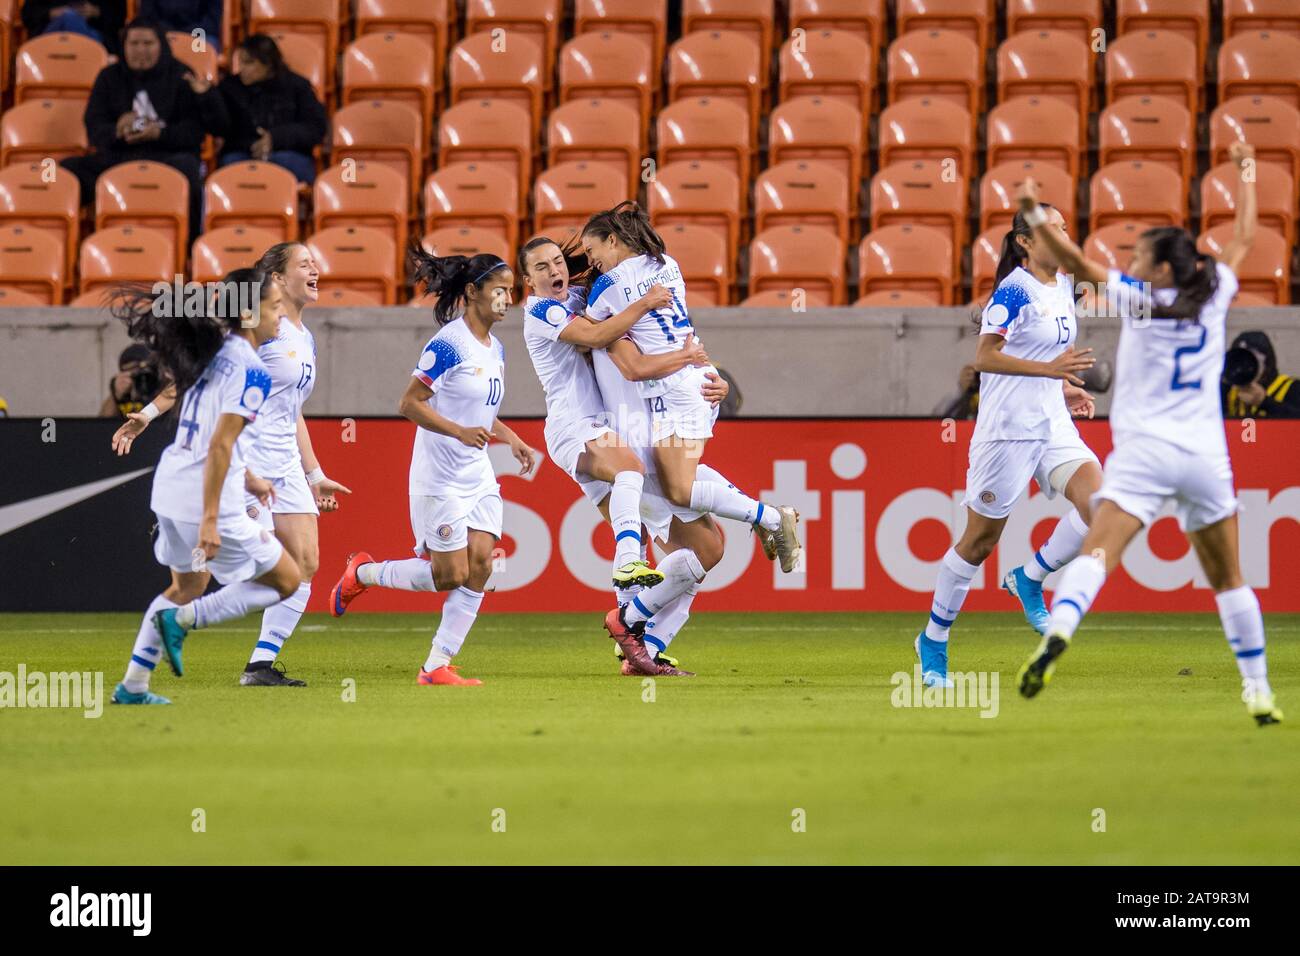 Houston, TX, USA. 31st Jan, 2020. Costa Rica celebrates a goal by midfielder Raquel Rodriguez during the 2nd half of a CONCACAF Olympic Qualifying soccer match between Haiti and Costa Rica at BBVA Stadium in Houston, TX. Costa Rica won the game 2 to 0.Trask Smith/CSM/Alamy Live News Stock Photo